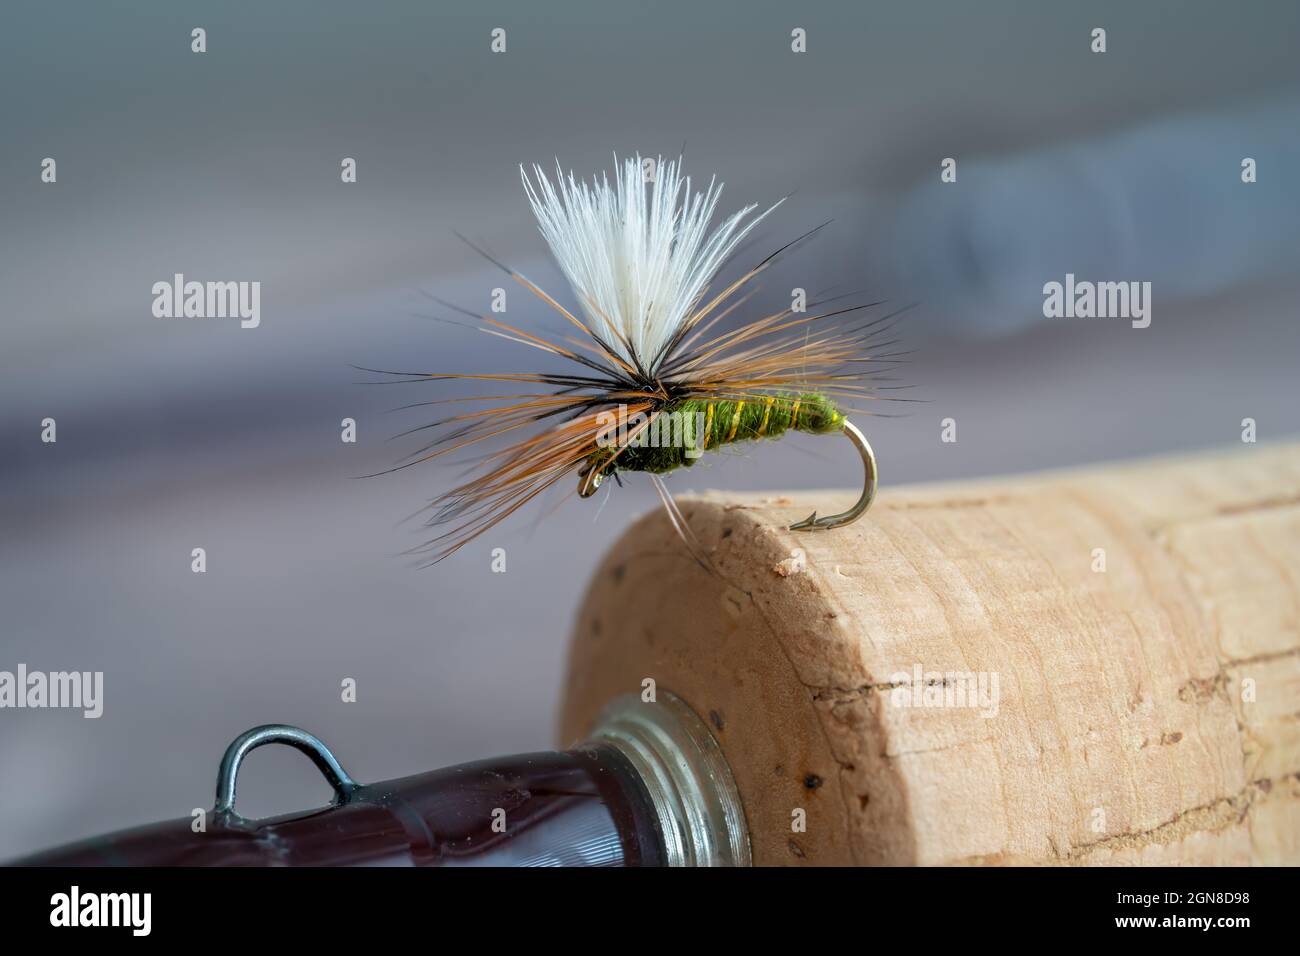 Selected Focus Greenwells Glory Parachute dry fly fishing fly hooked into the handle of a fly rod with hook eye Stock Photo